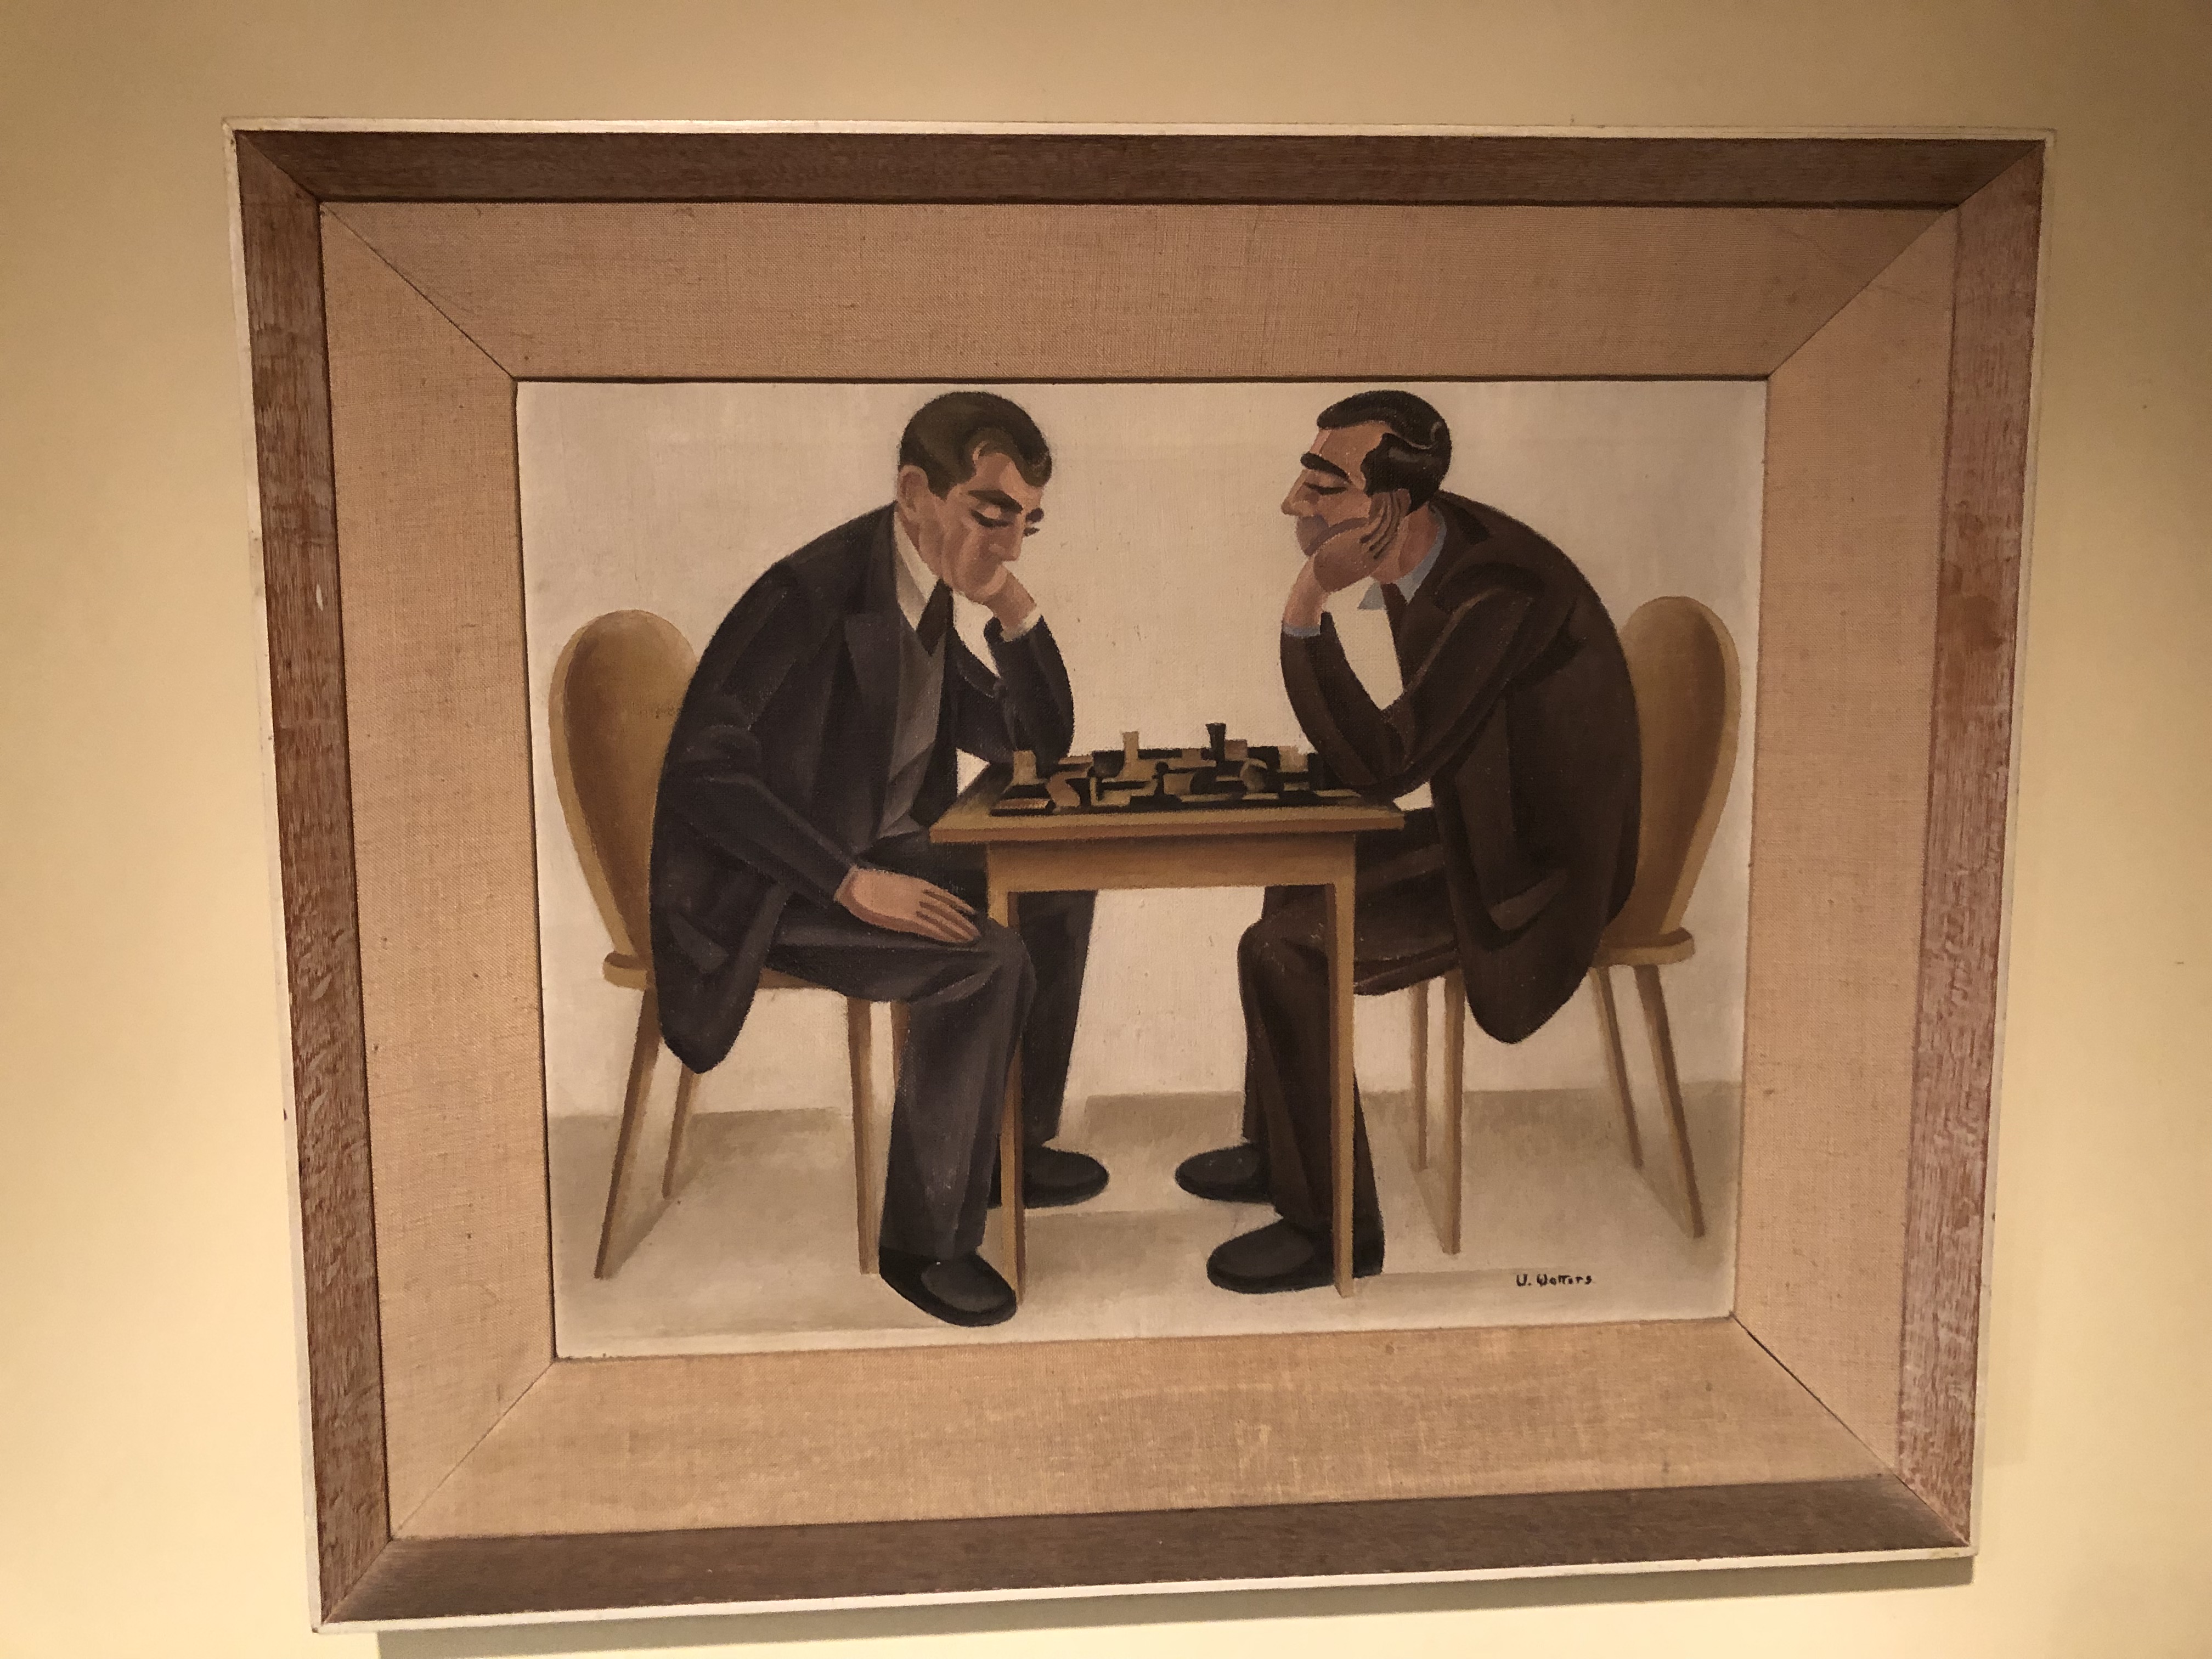 A Game of Chess – Una Watters (1918-1965)